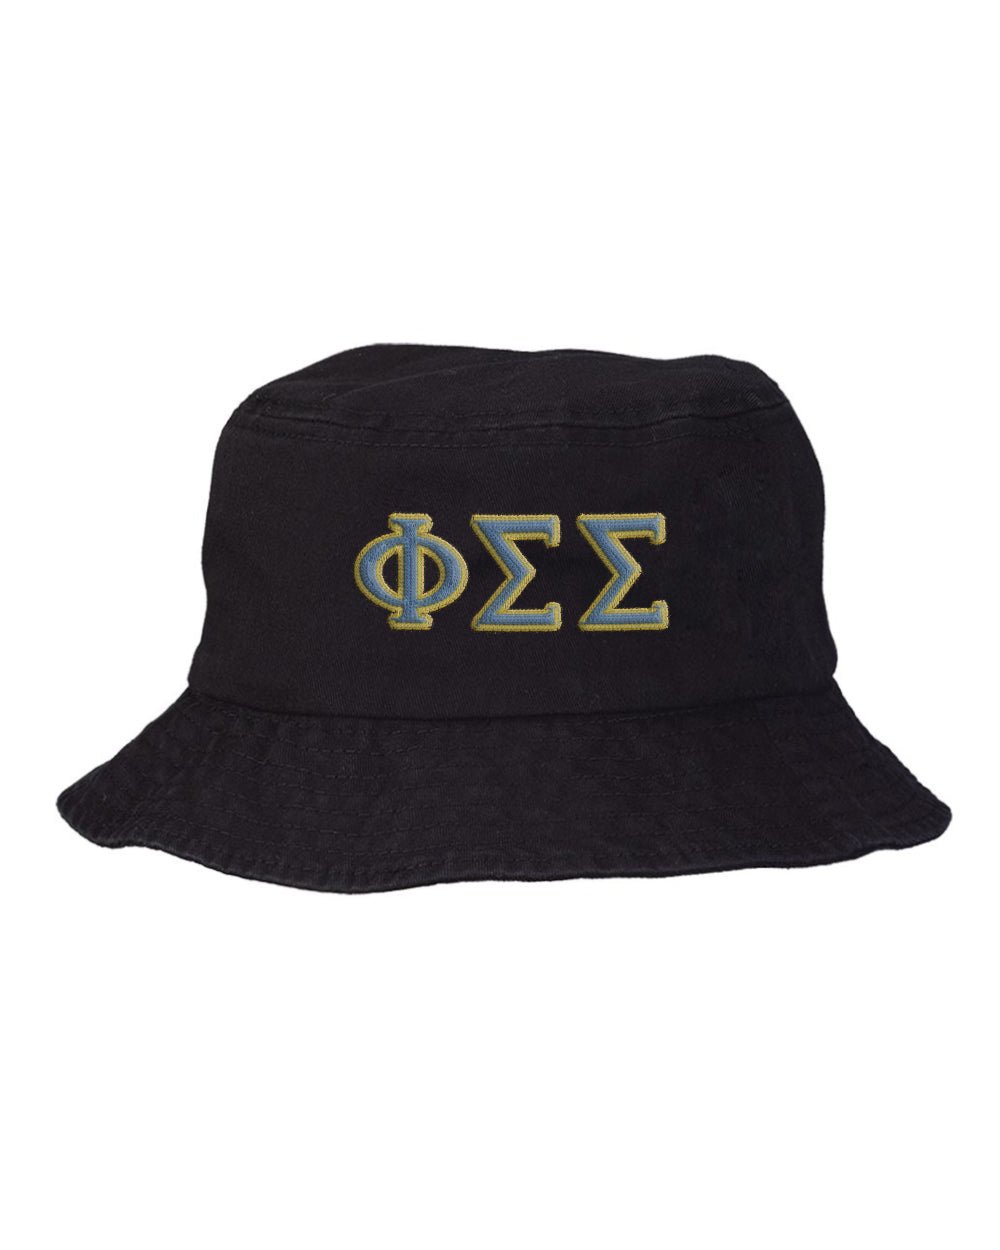 Phi Sigma Sigma  Embroidered Bucket Hat